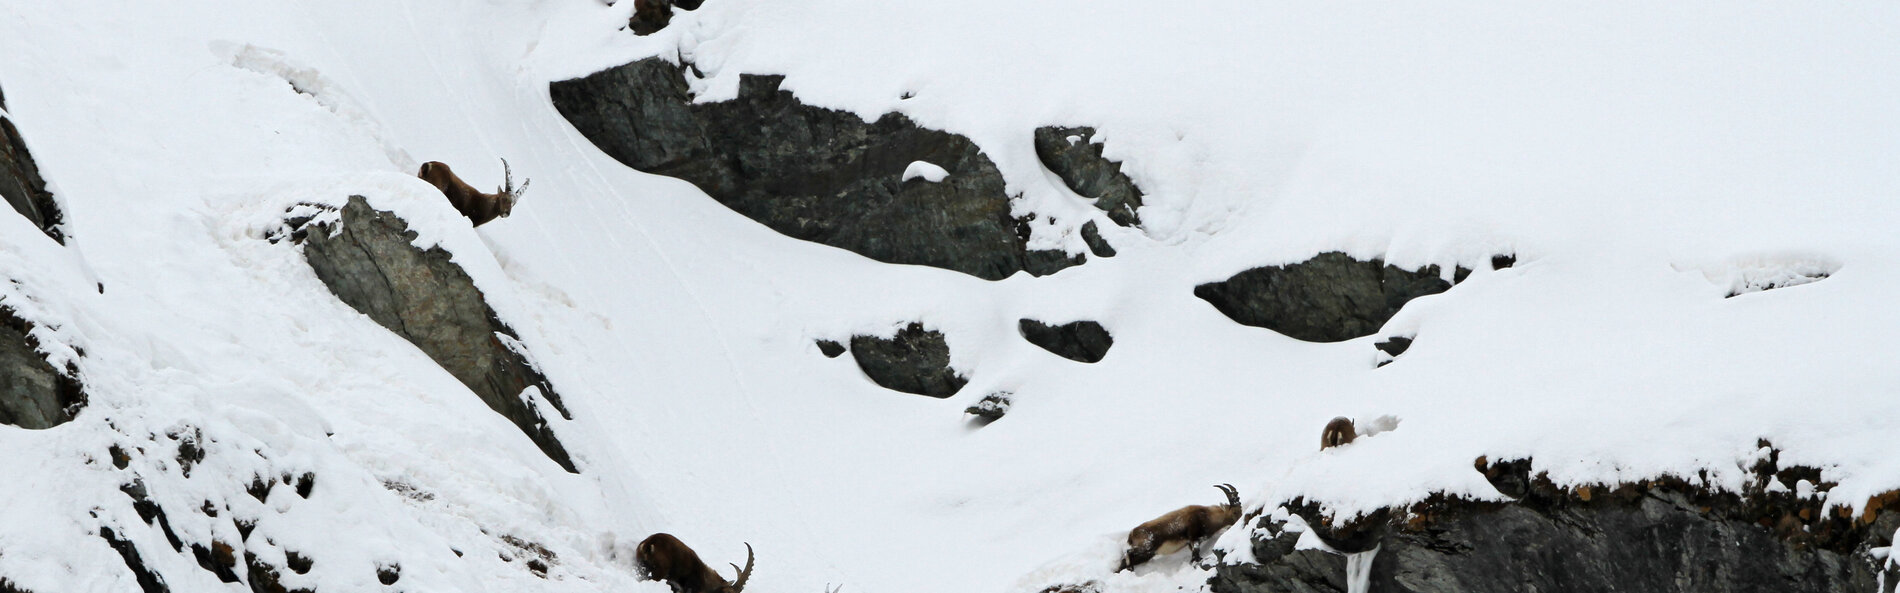 Ibexes on the slope